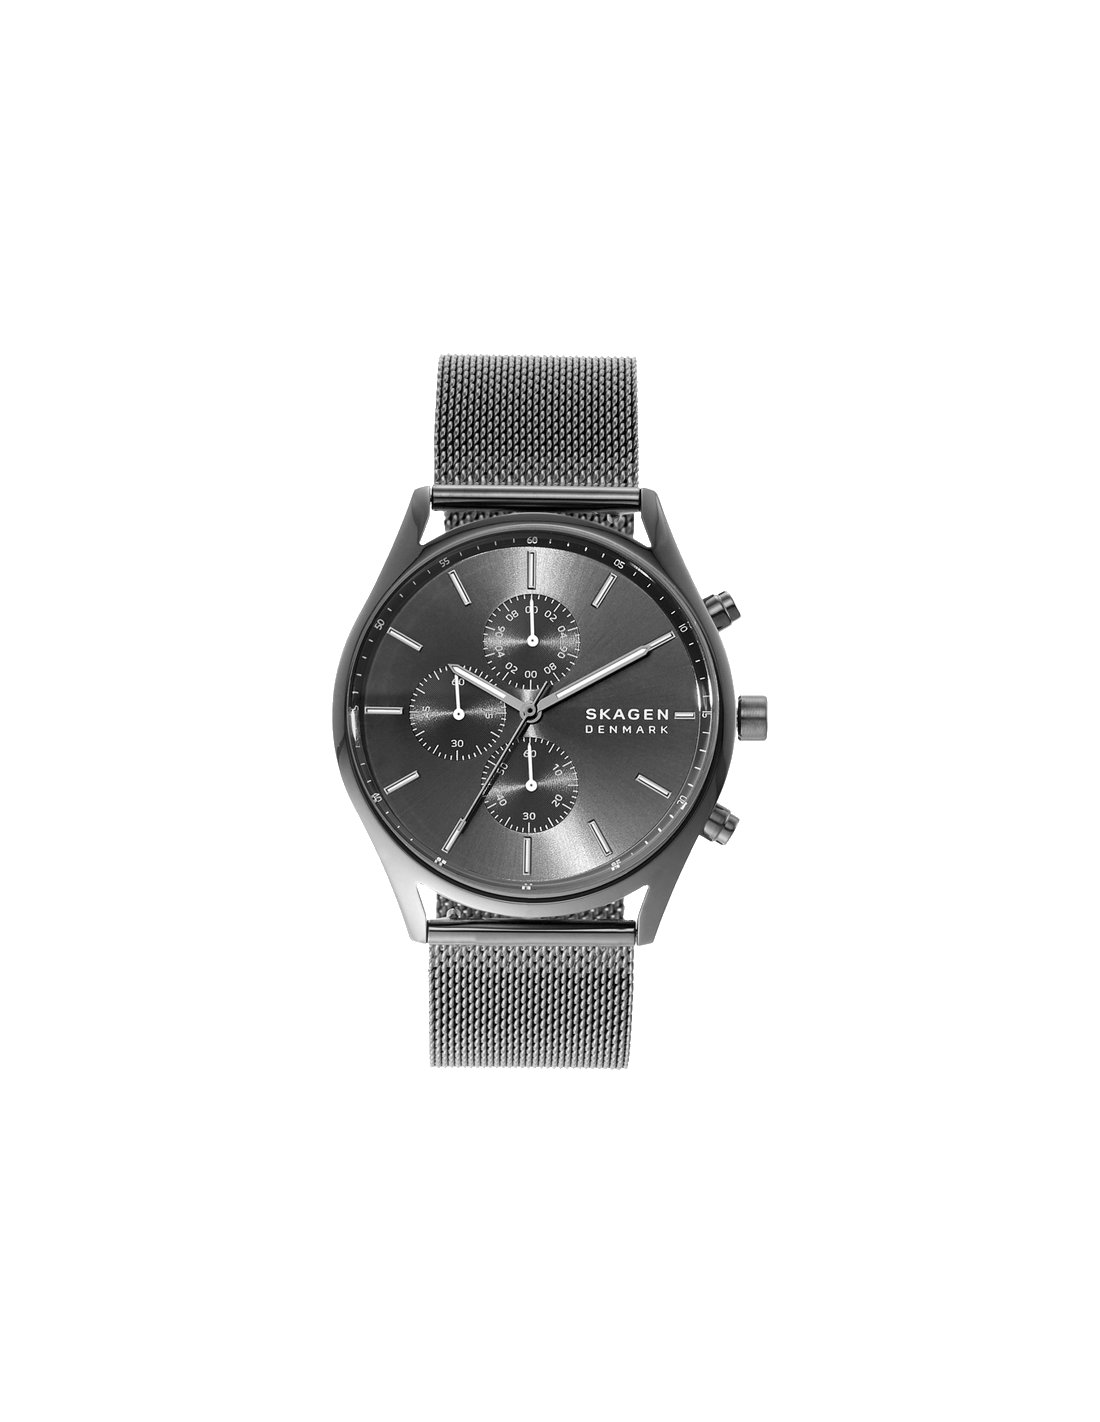 Swiss Watch SKW6608 India I House Time in Buy Skagen